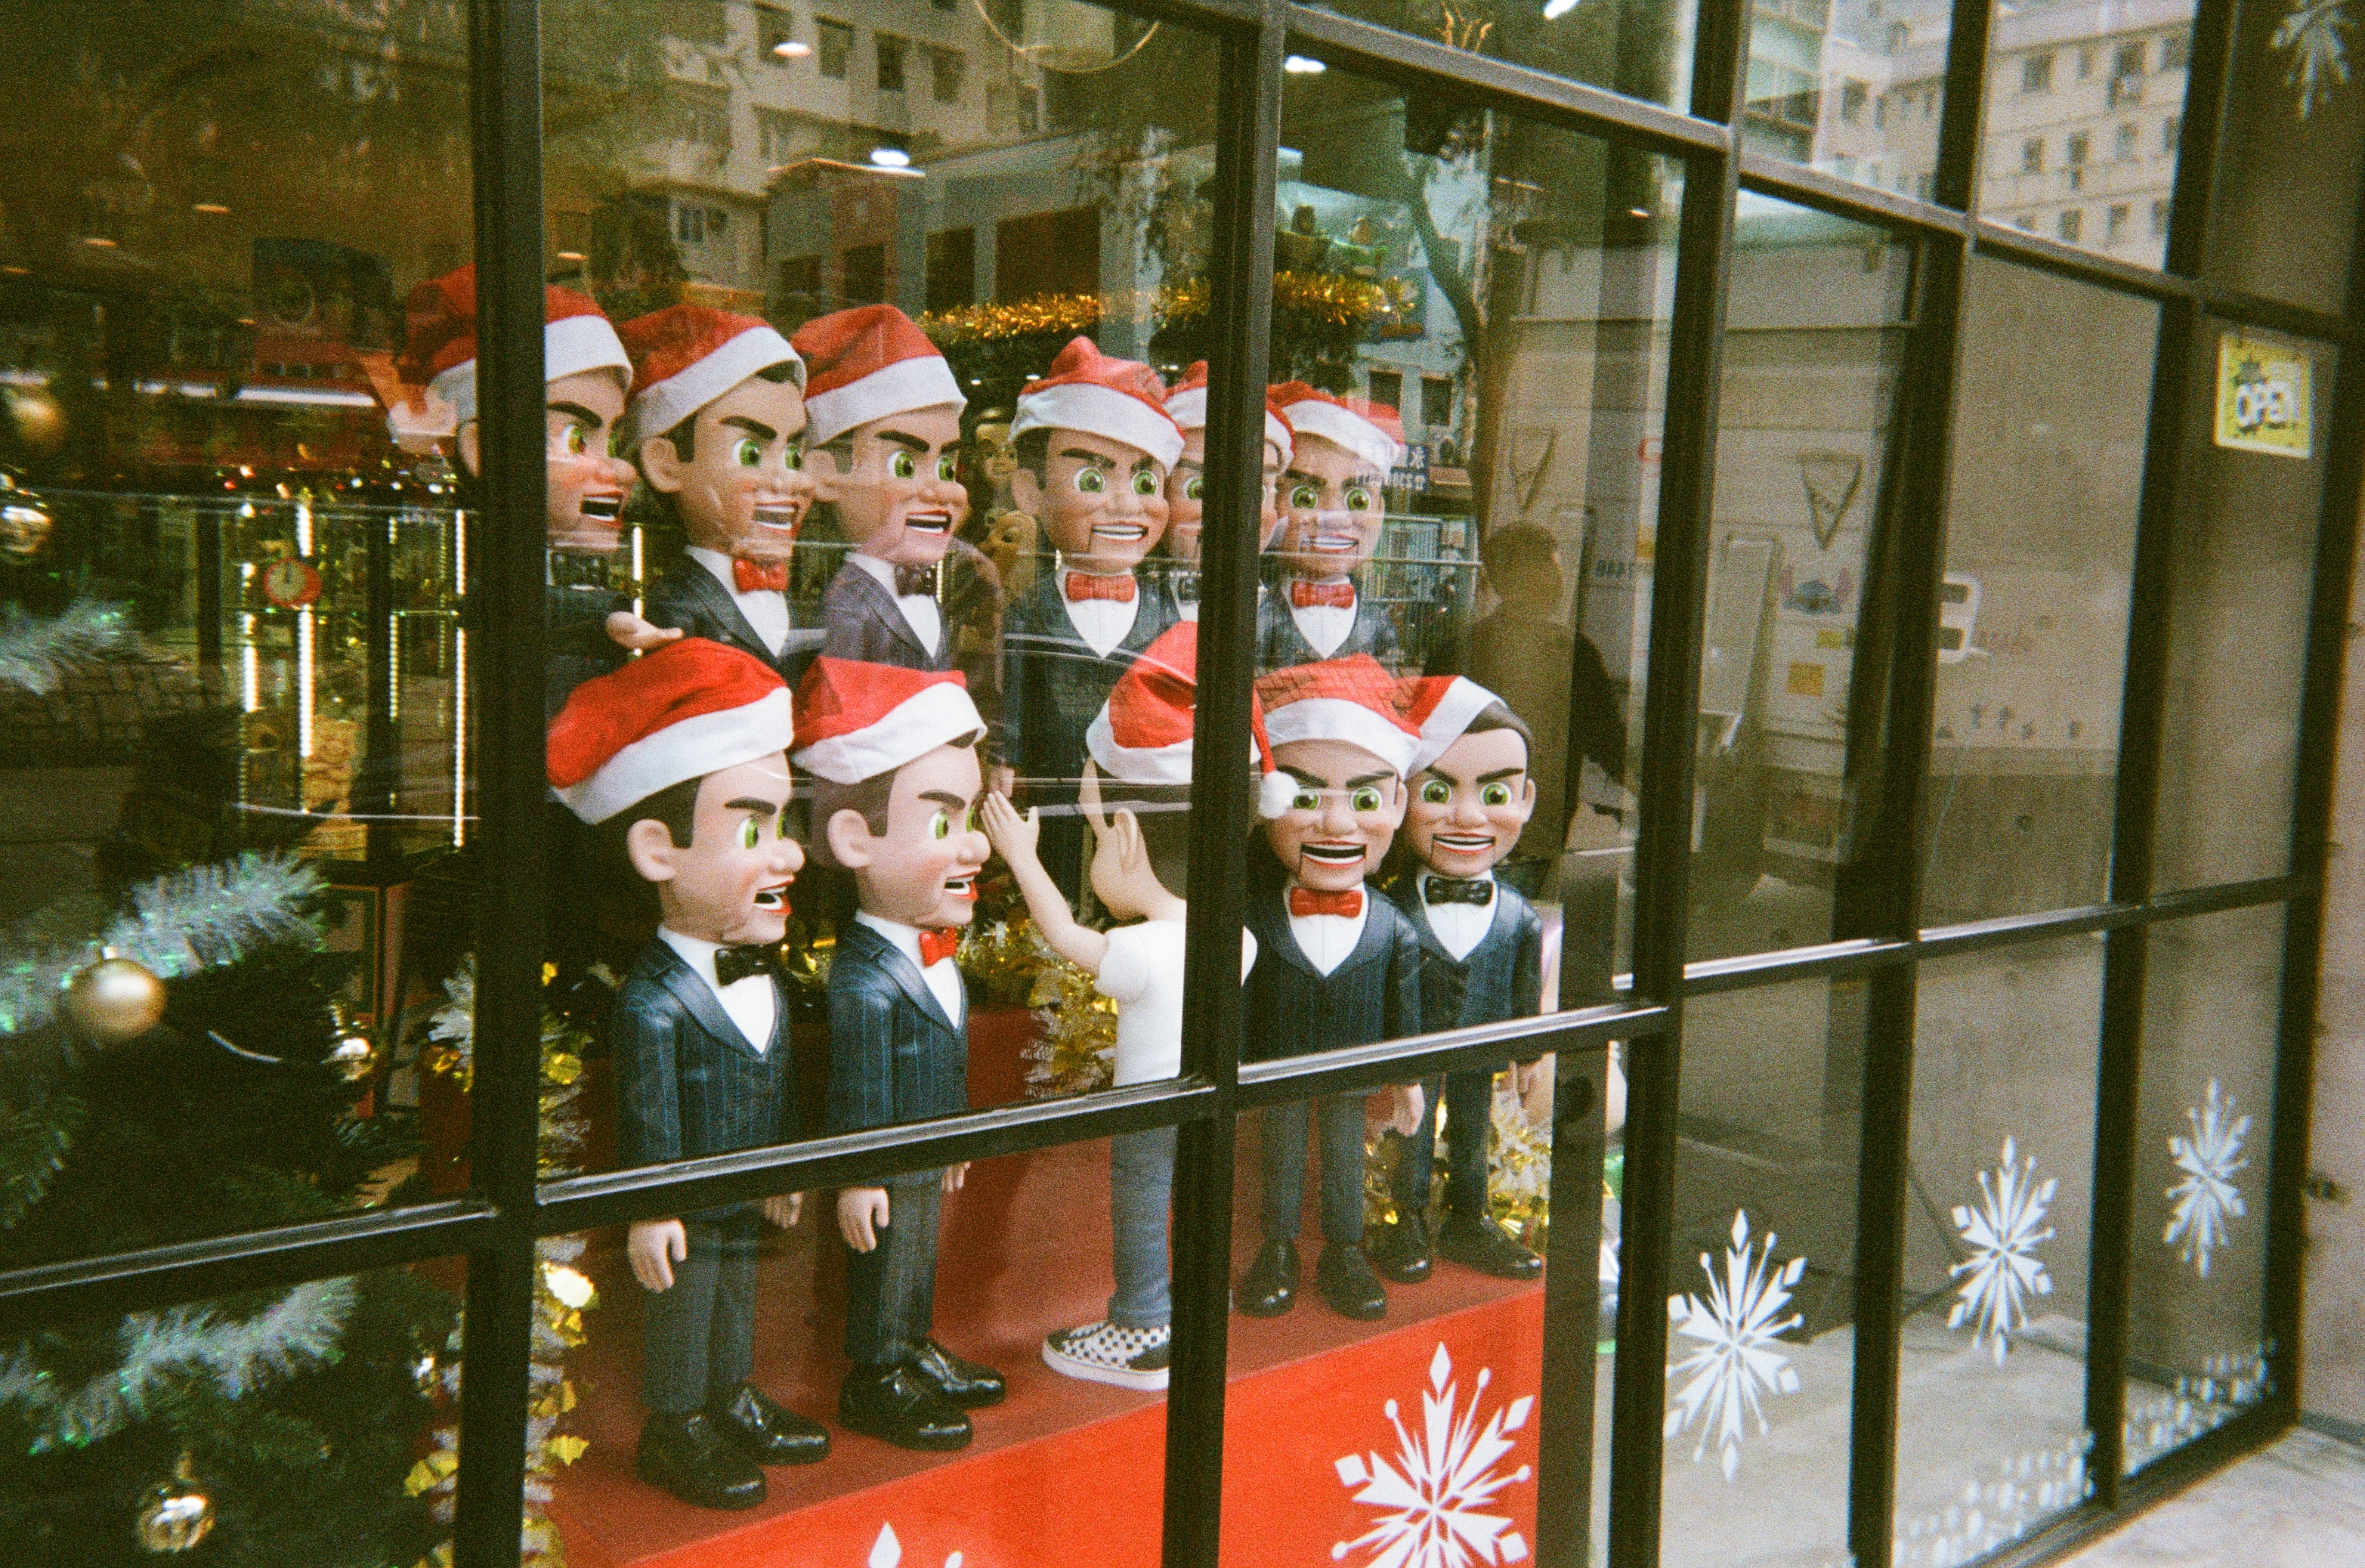 Christmasy choir figures lining up in a Shamshuipo shop, Hong Kong.